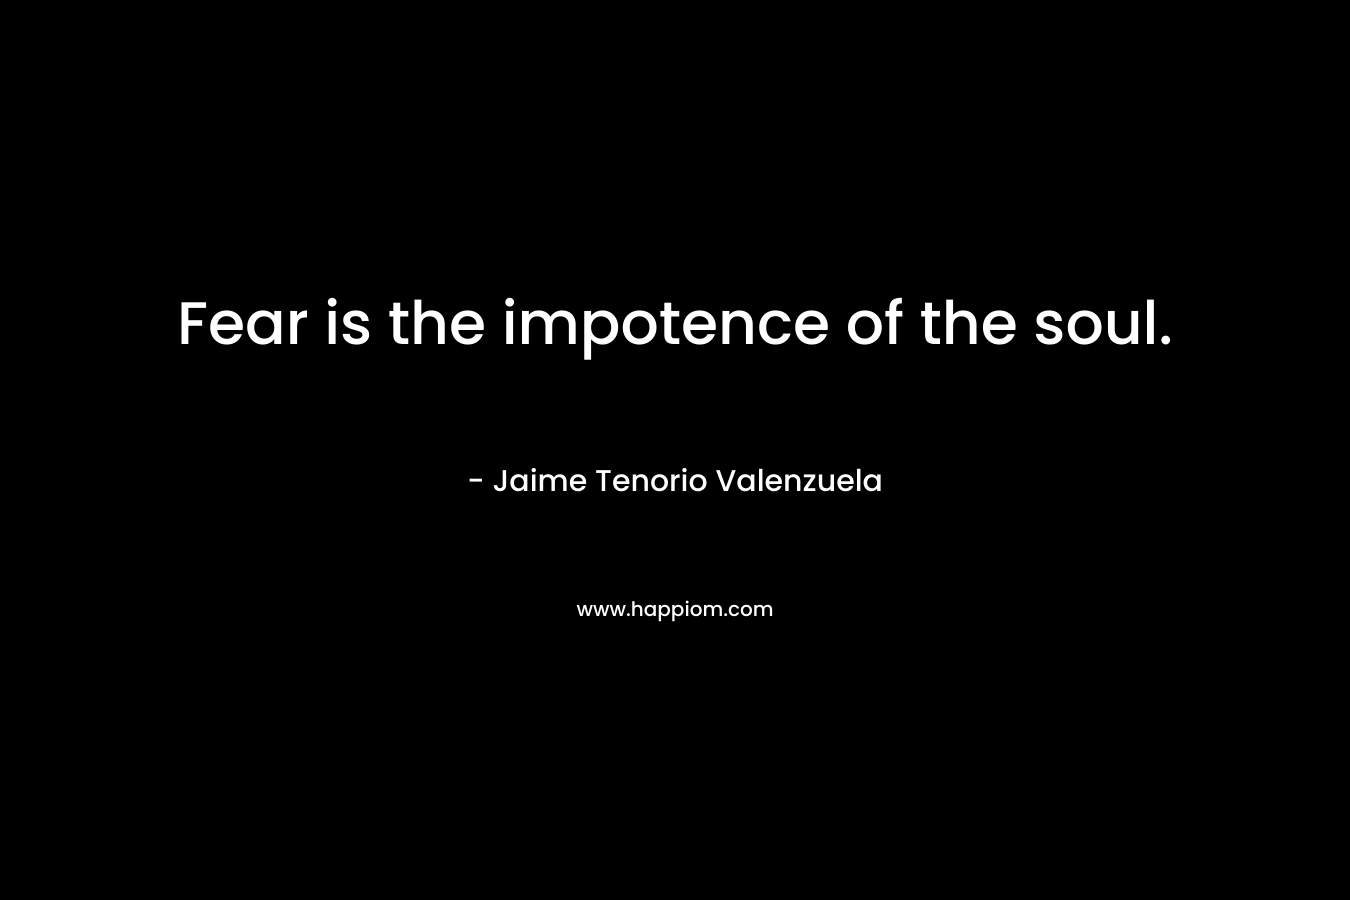 Fear is the impotence of the soul.